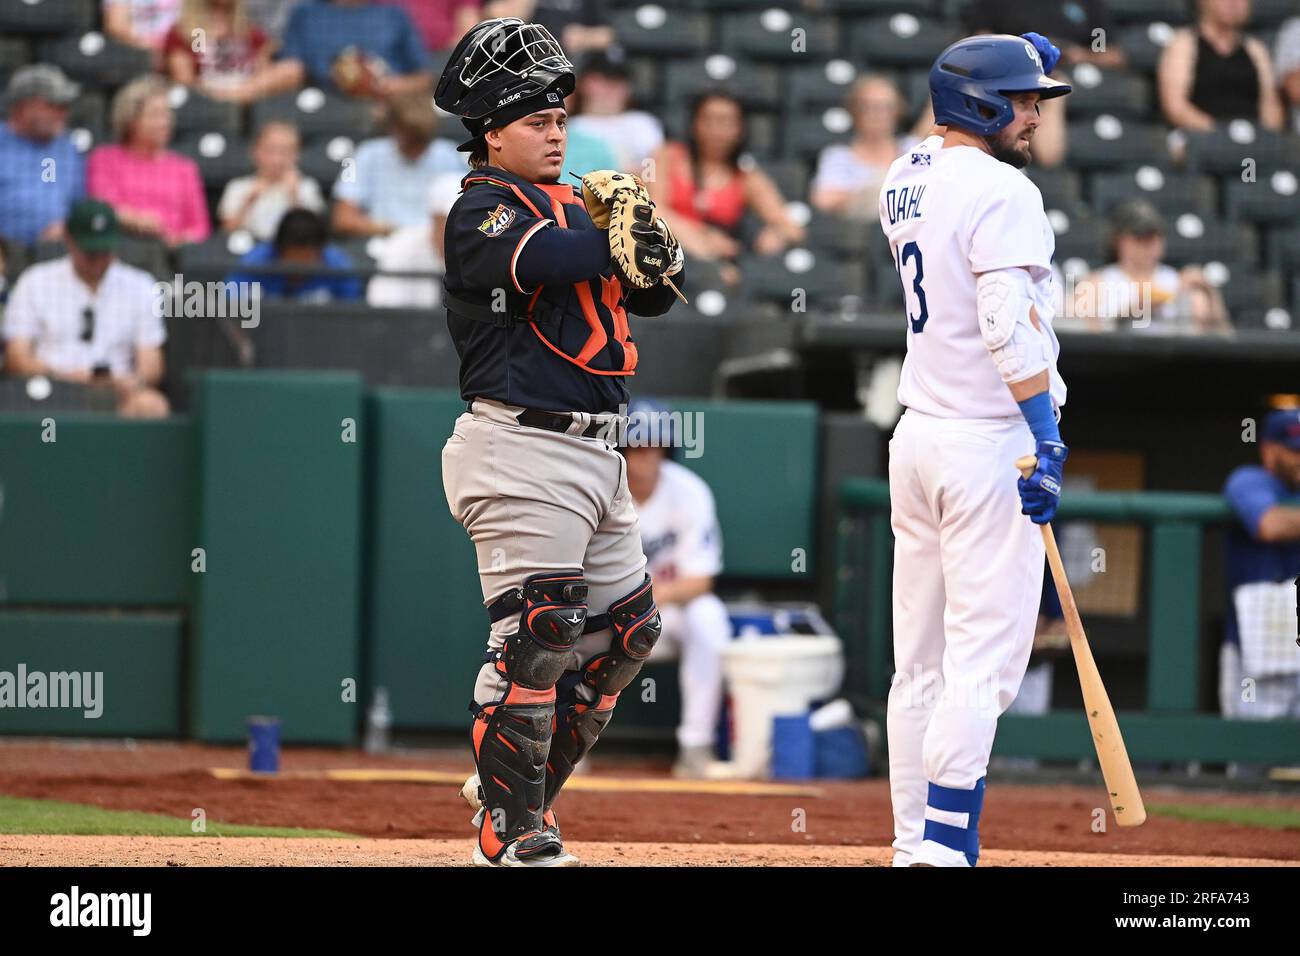 Catcher Yohel Pozo (6) of the Las Vegas Aviators stands behind home plate  waiting for the next batter in the game against the Oklahoma City Dodgers  on June 20, 2023 at Chickasaw